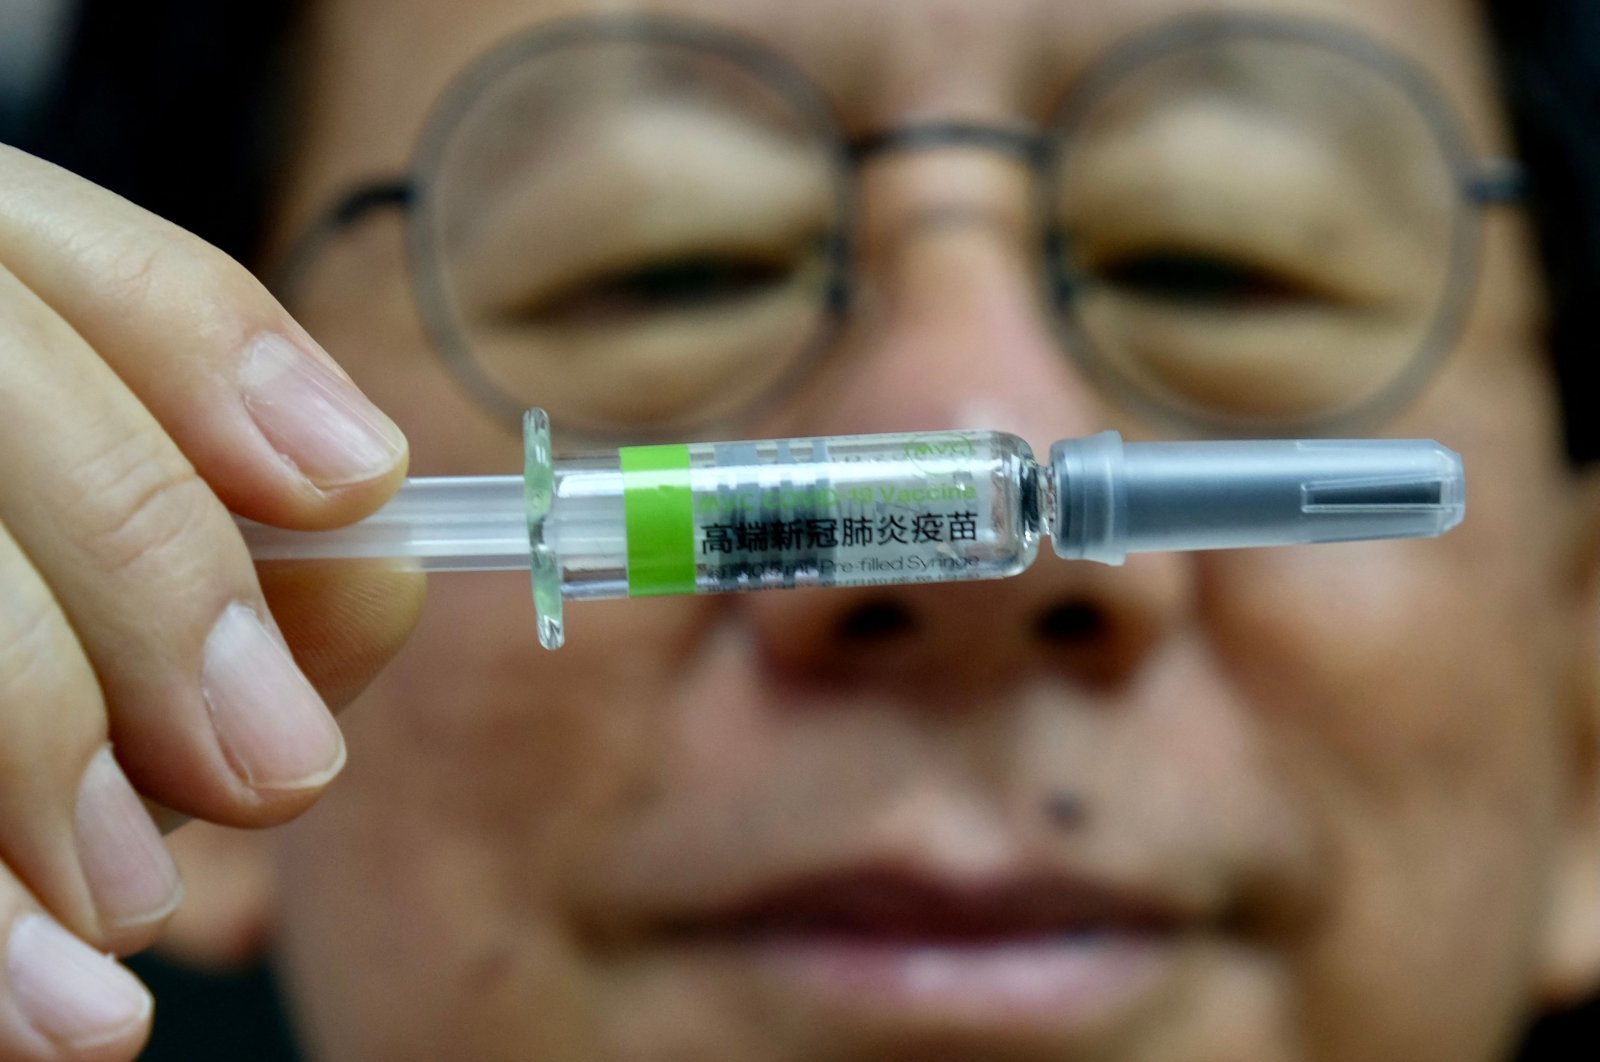 Charles Chen, Chief Executive Officer of Taiwan’s vaccine maker Medigen Vaccine Biologics Corp (MVC), poses for photographs with a vaccine sample at its headquarters in Taipei, Taiwan, on June 16, 2021. (AFP Photo)